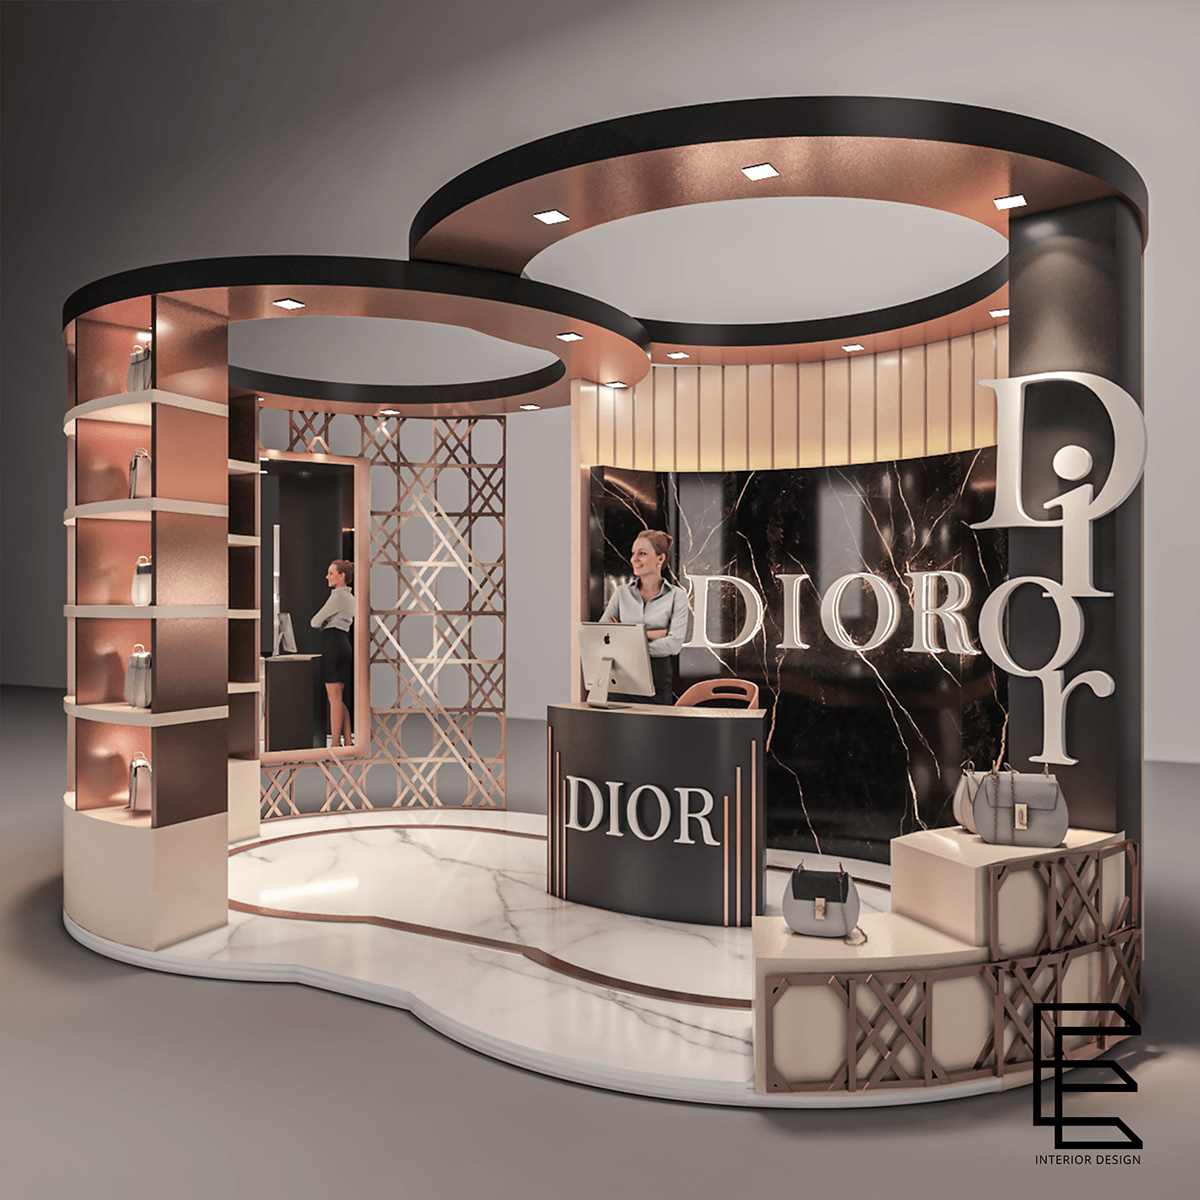 booth design interior design  3ds max vray corona render  visualization corona Dior booth 3d modeling